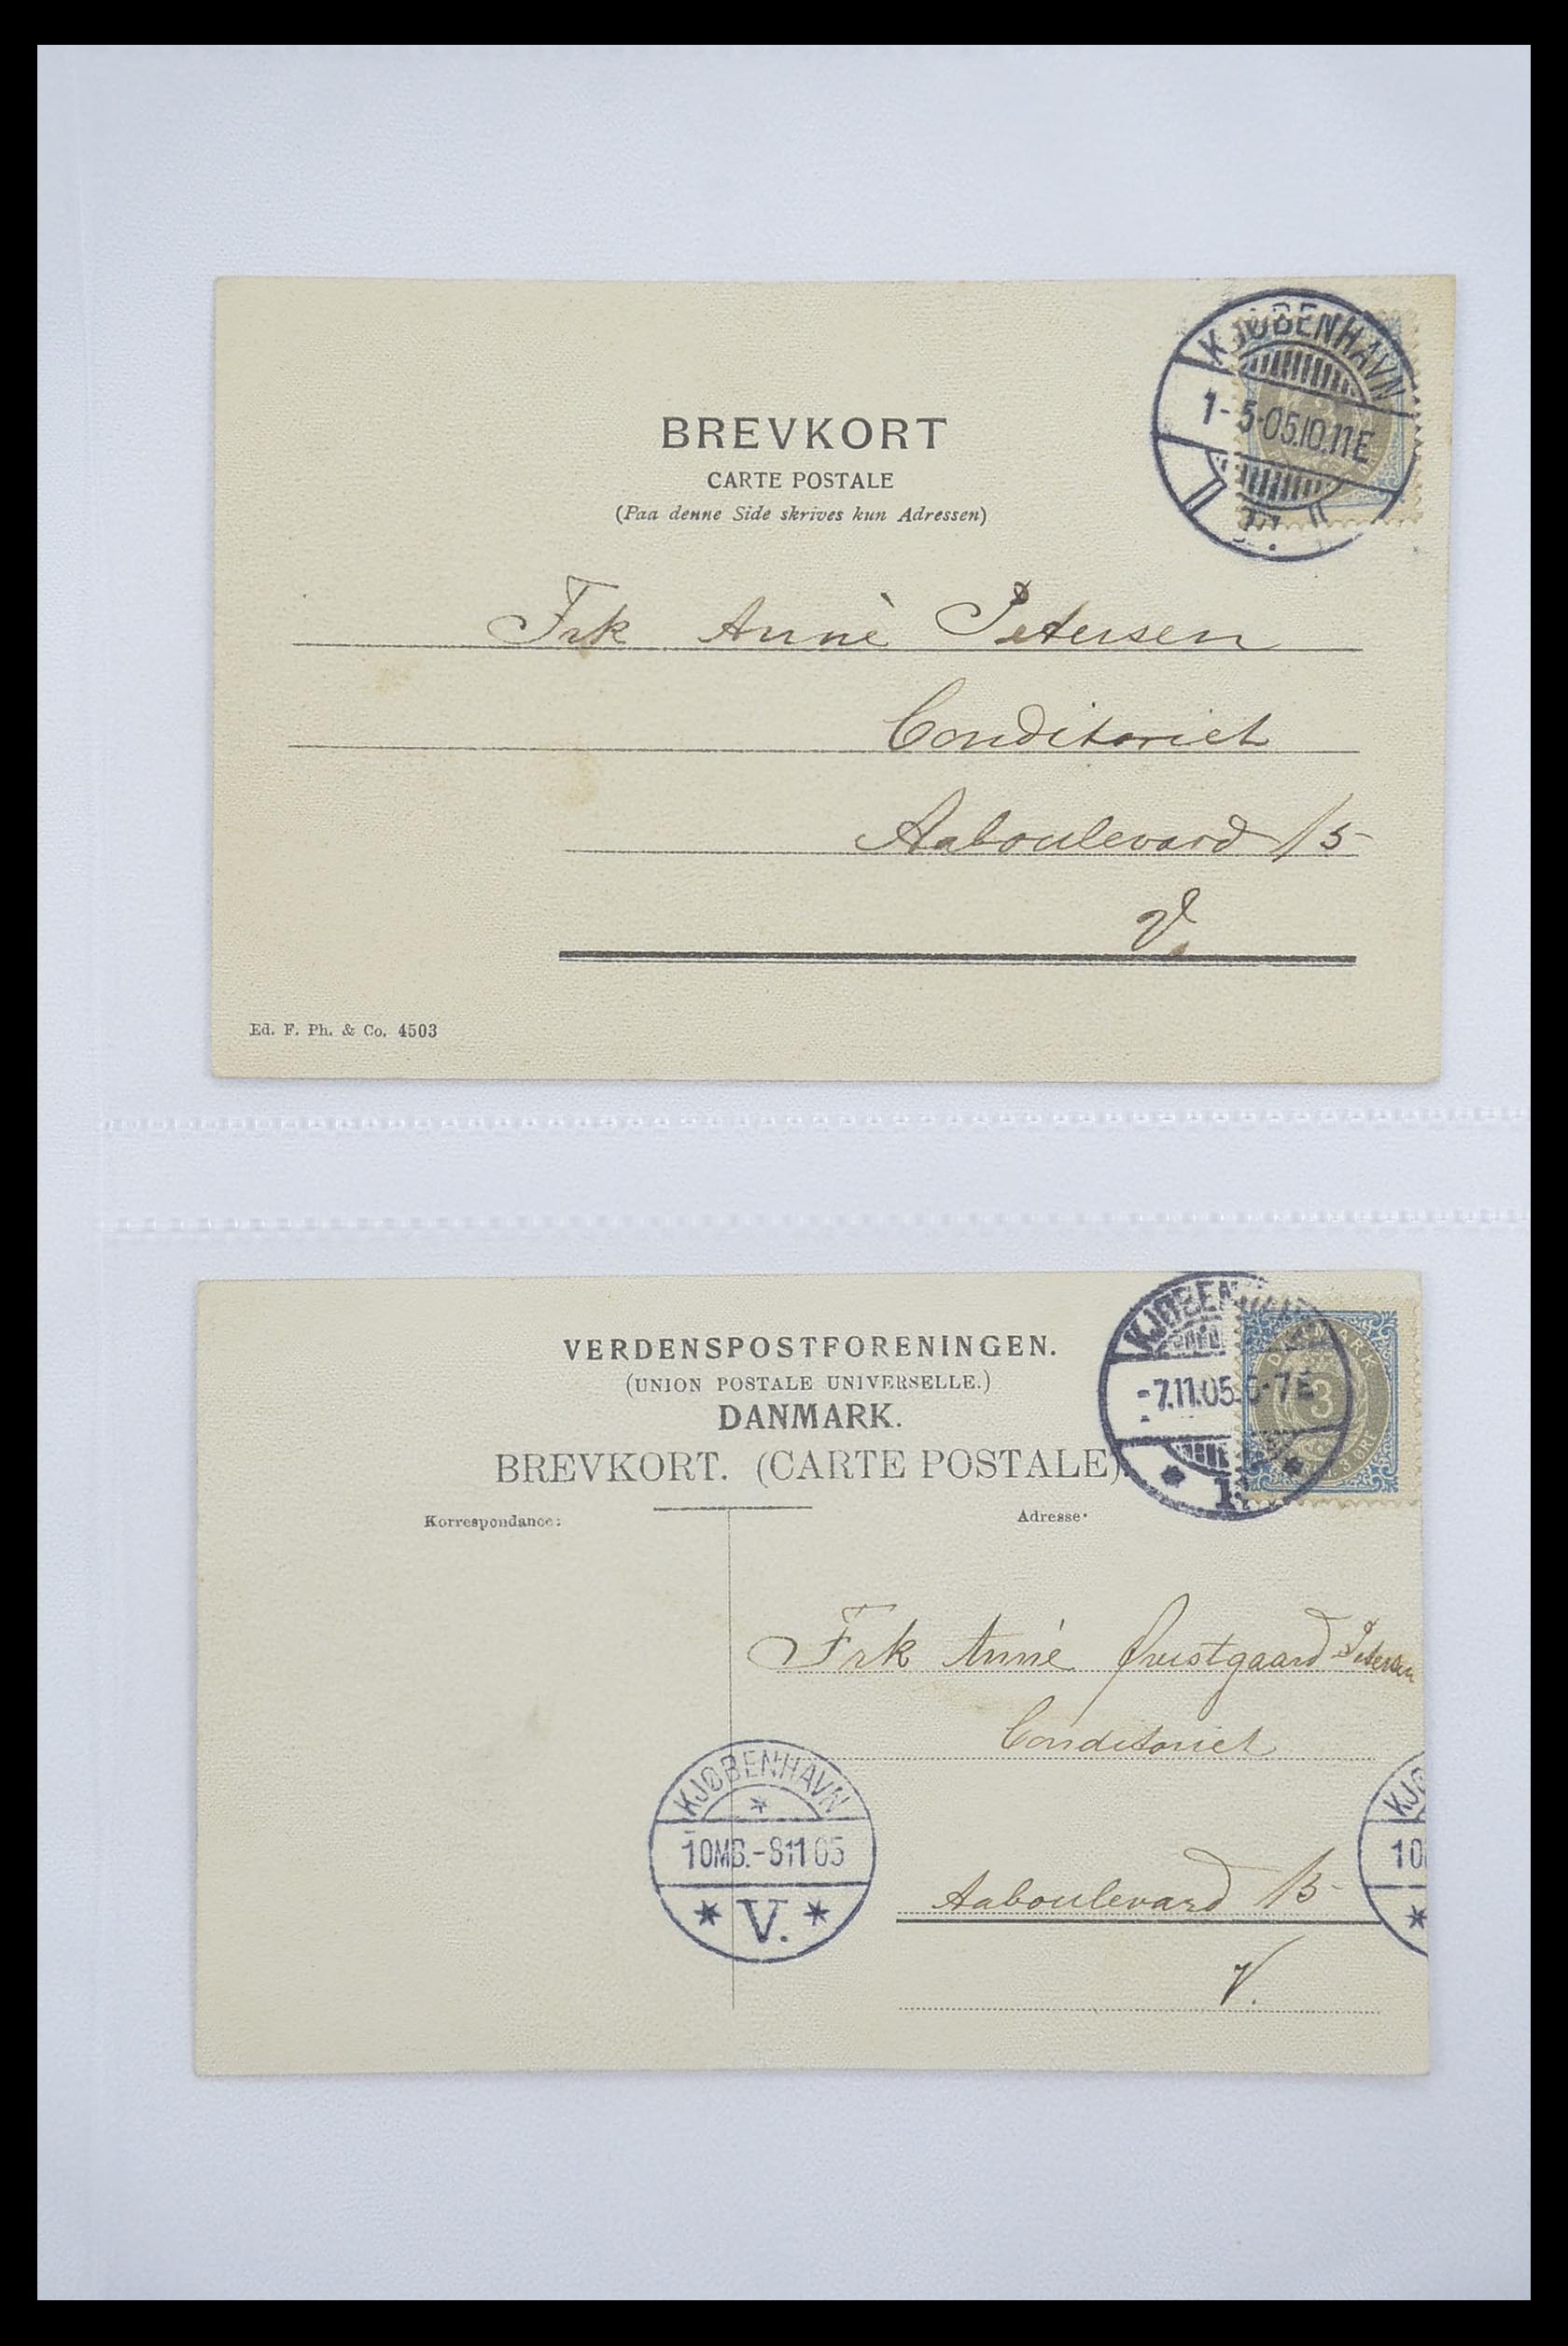 33241 007 - Stamp collection 33241 Scandinavia covers 1860-1930.